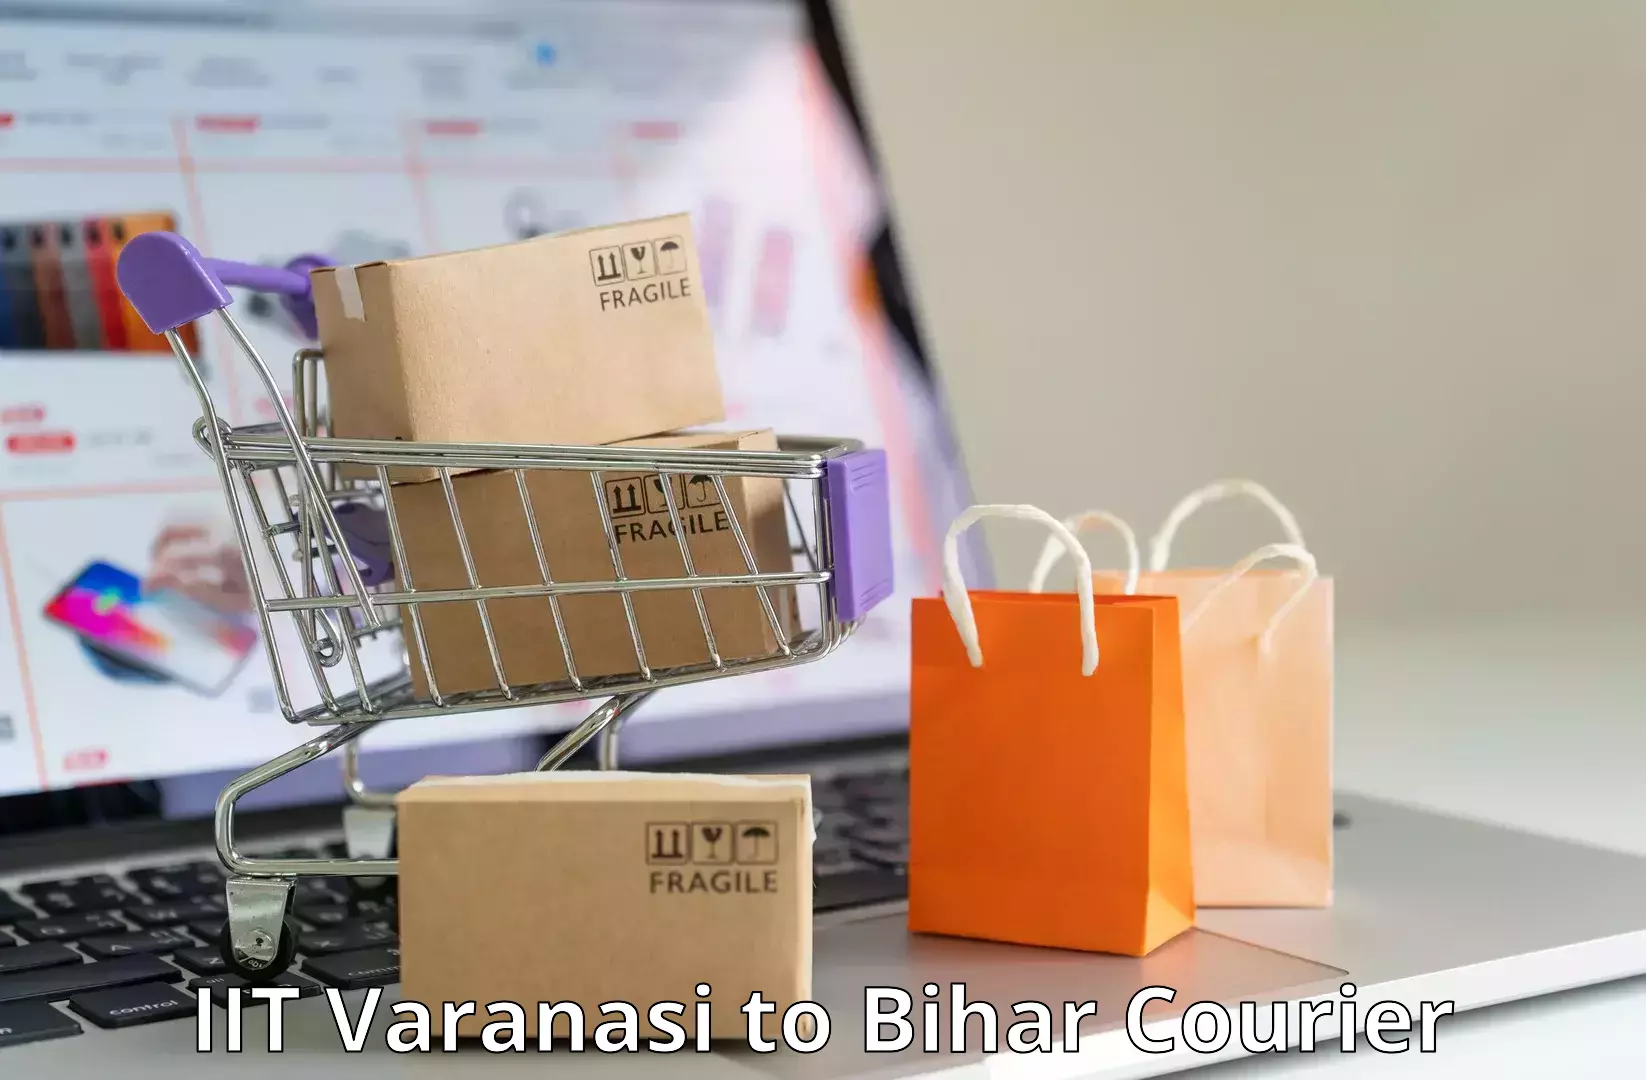 Easy access courier services IIT Varanasi to Bhojpur